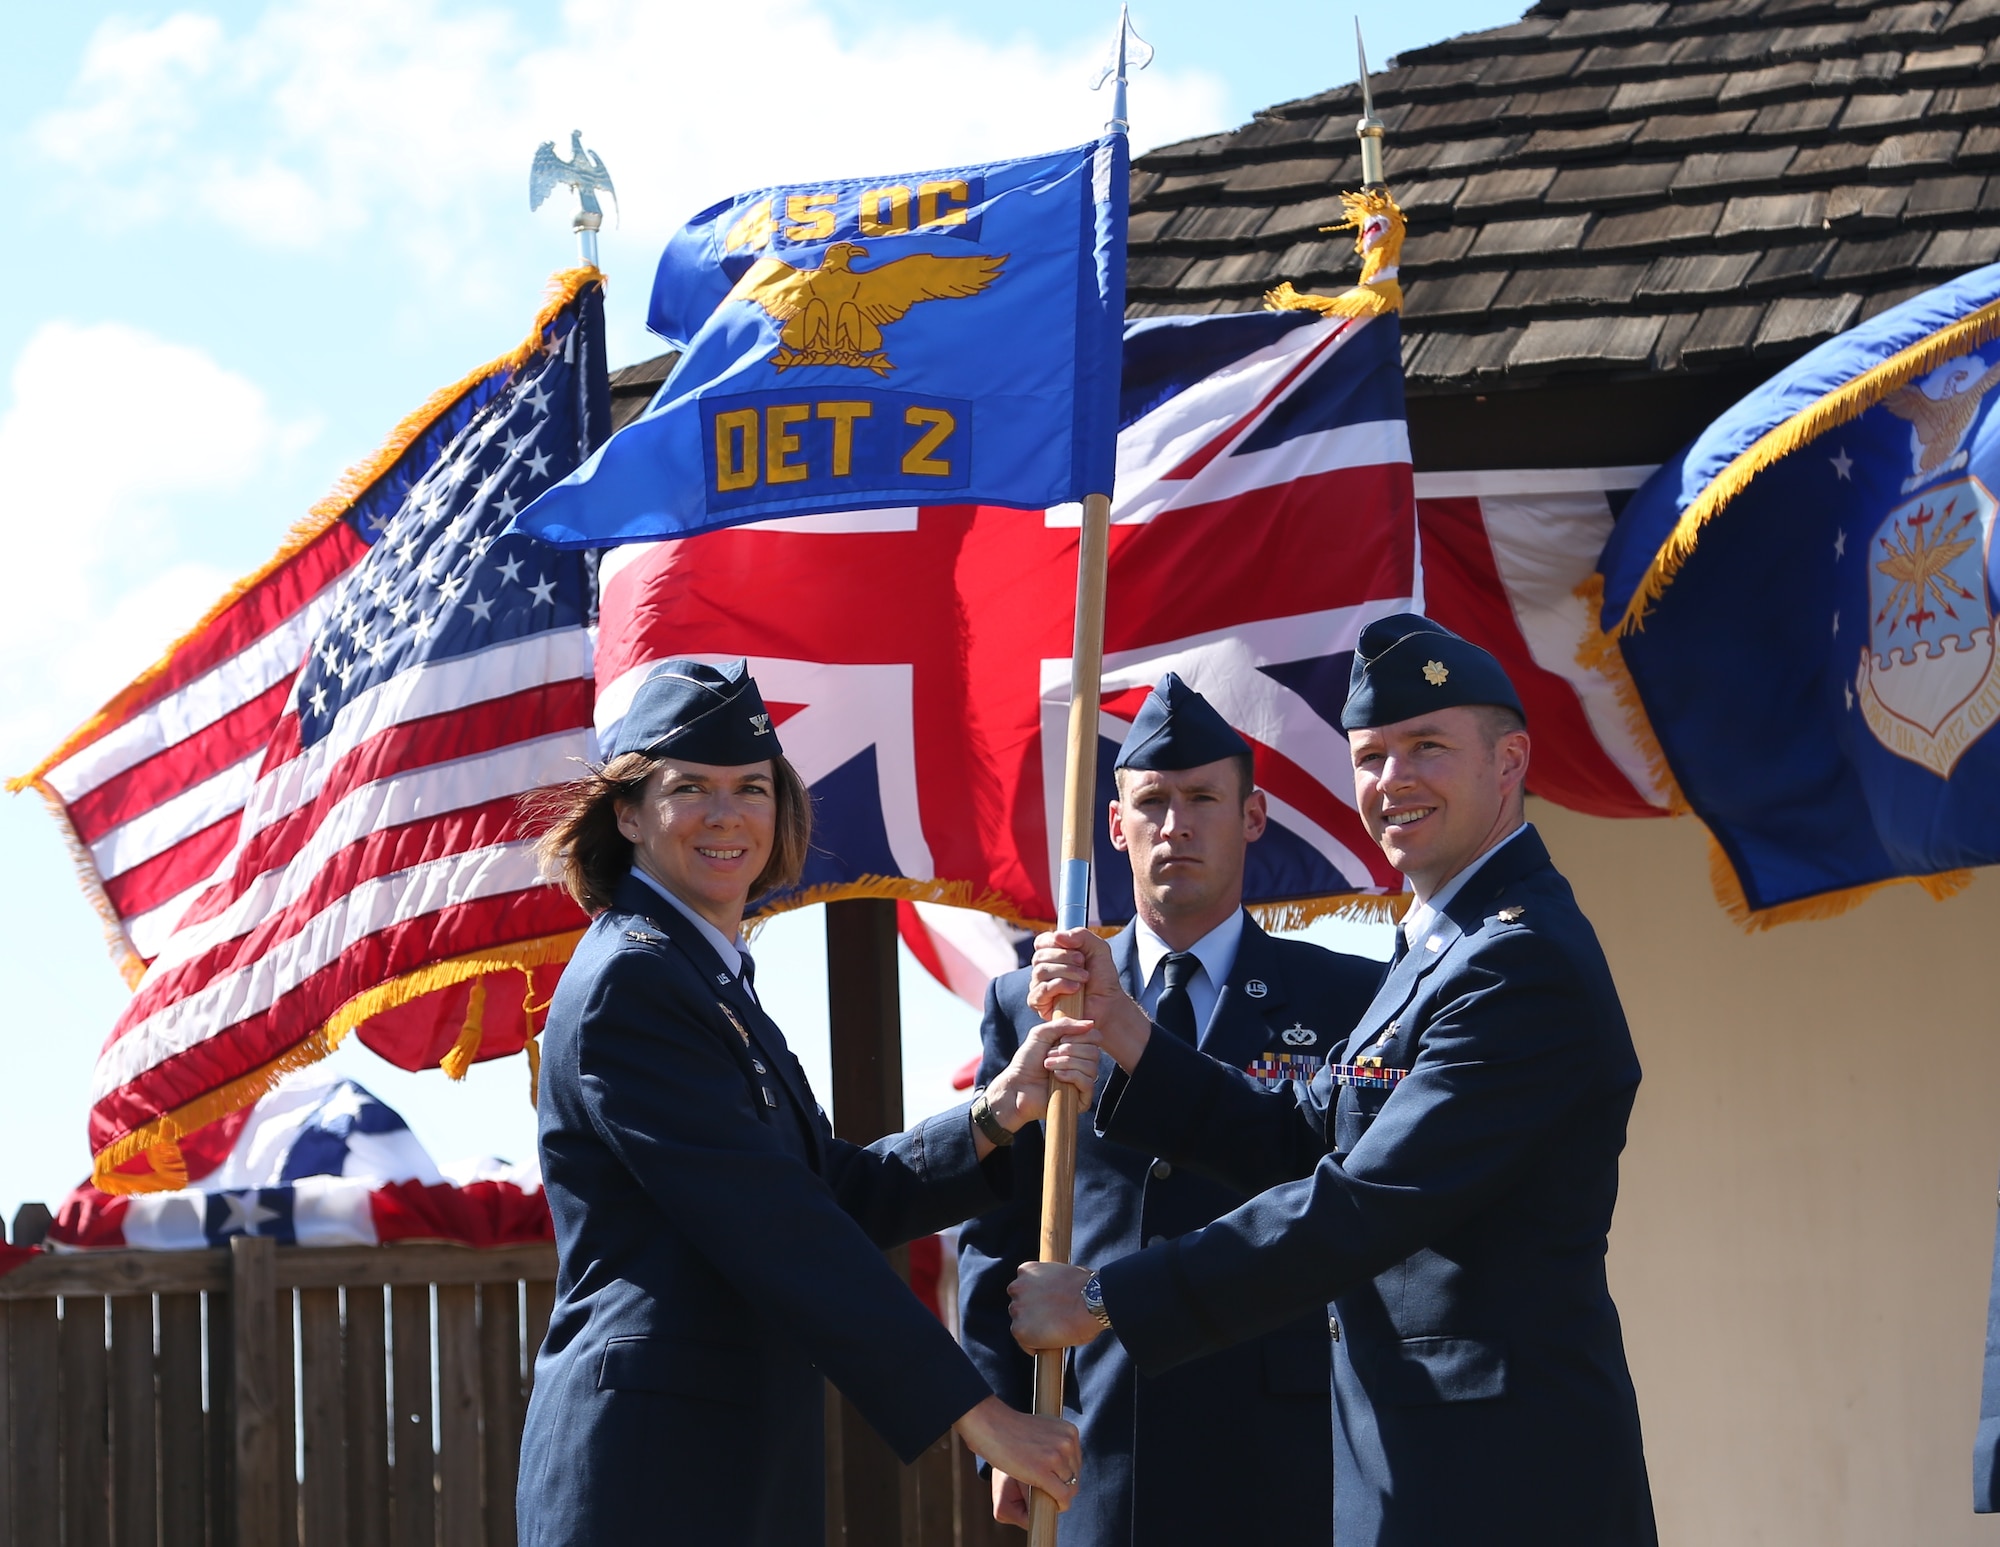 Col. Shannon Klug, 45th Weather Squadron commander and acting Operations Group Deputy Commander, left, presents Maj. Andrew Emslie, 45th Operations Group Detachment 2 commander, with the 45th OG Det. 2 guidon during a Change of Command ceremony July 8, 2014, at Ascension Auxiliary Airfield, Ascension Island, South Atlantic. Changes of Command are a military tradition representing the transfer of responsibilities from the presiding officials to the upcoming official. (U.S. Air Force photo/Herbert Orlandi)